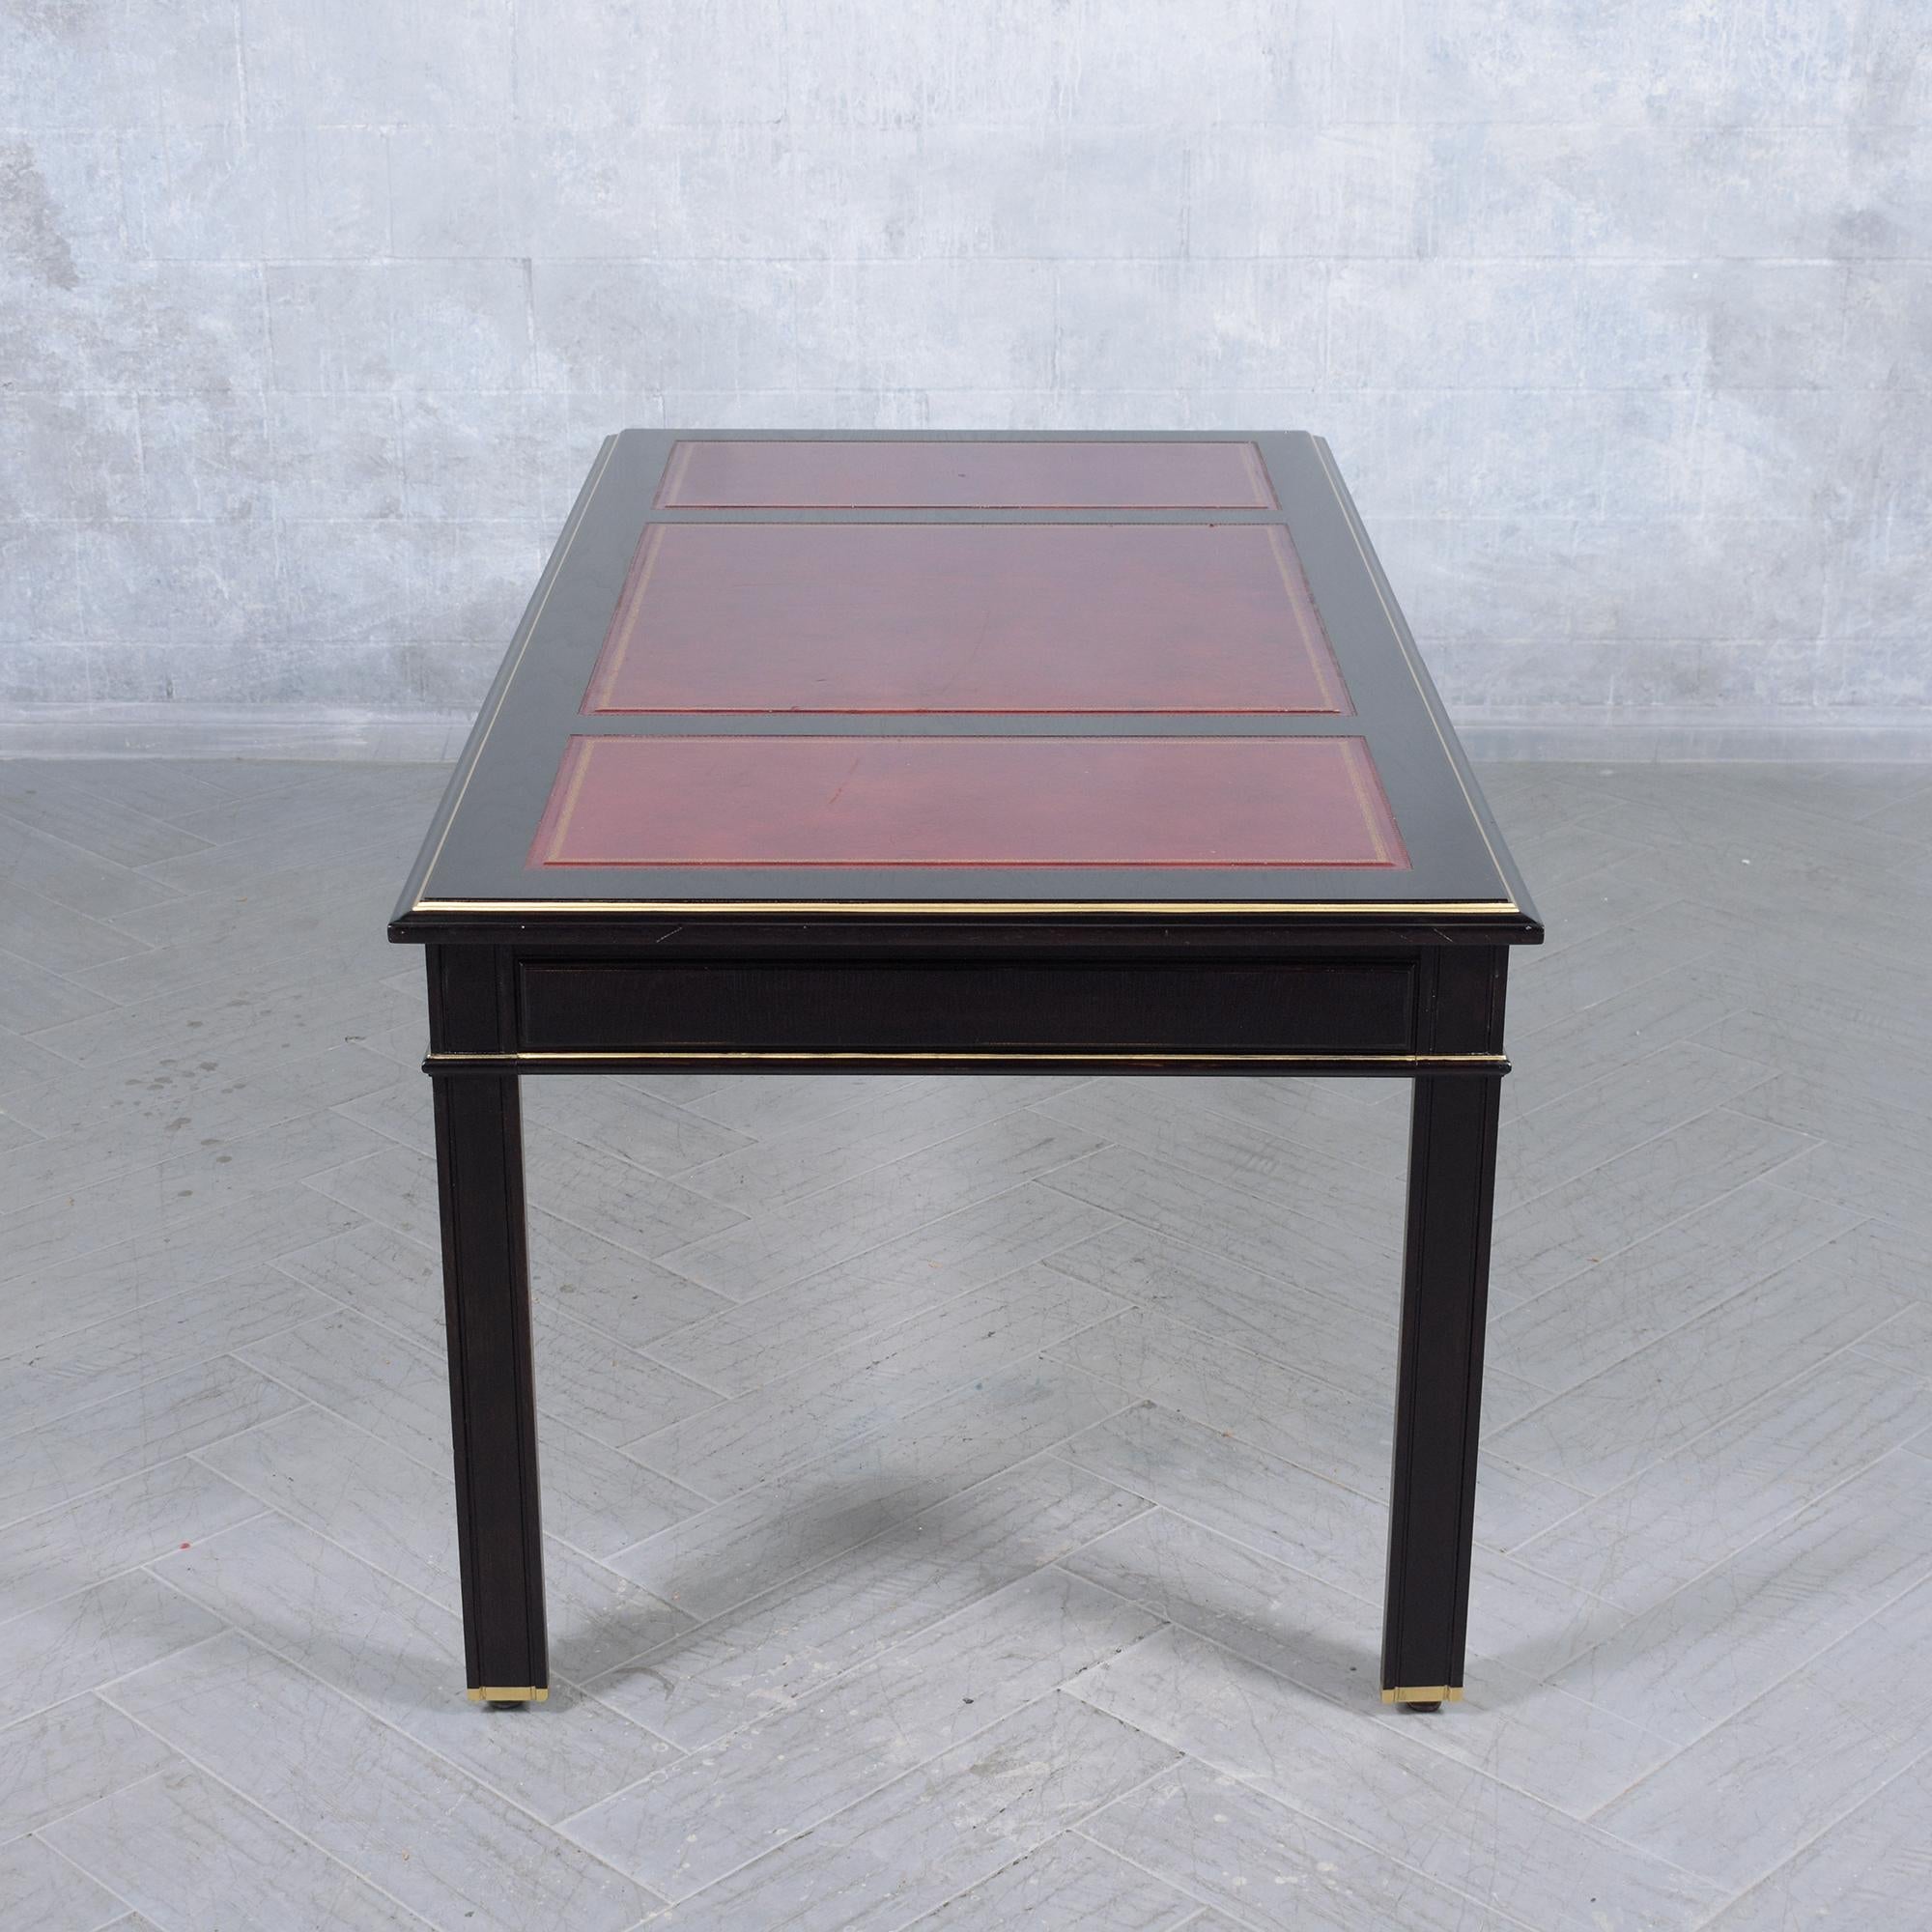 1970s Louis XVI Executive Desk: A Legacy of Elegance and Craftsmanship 9